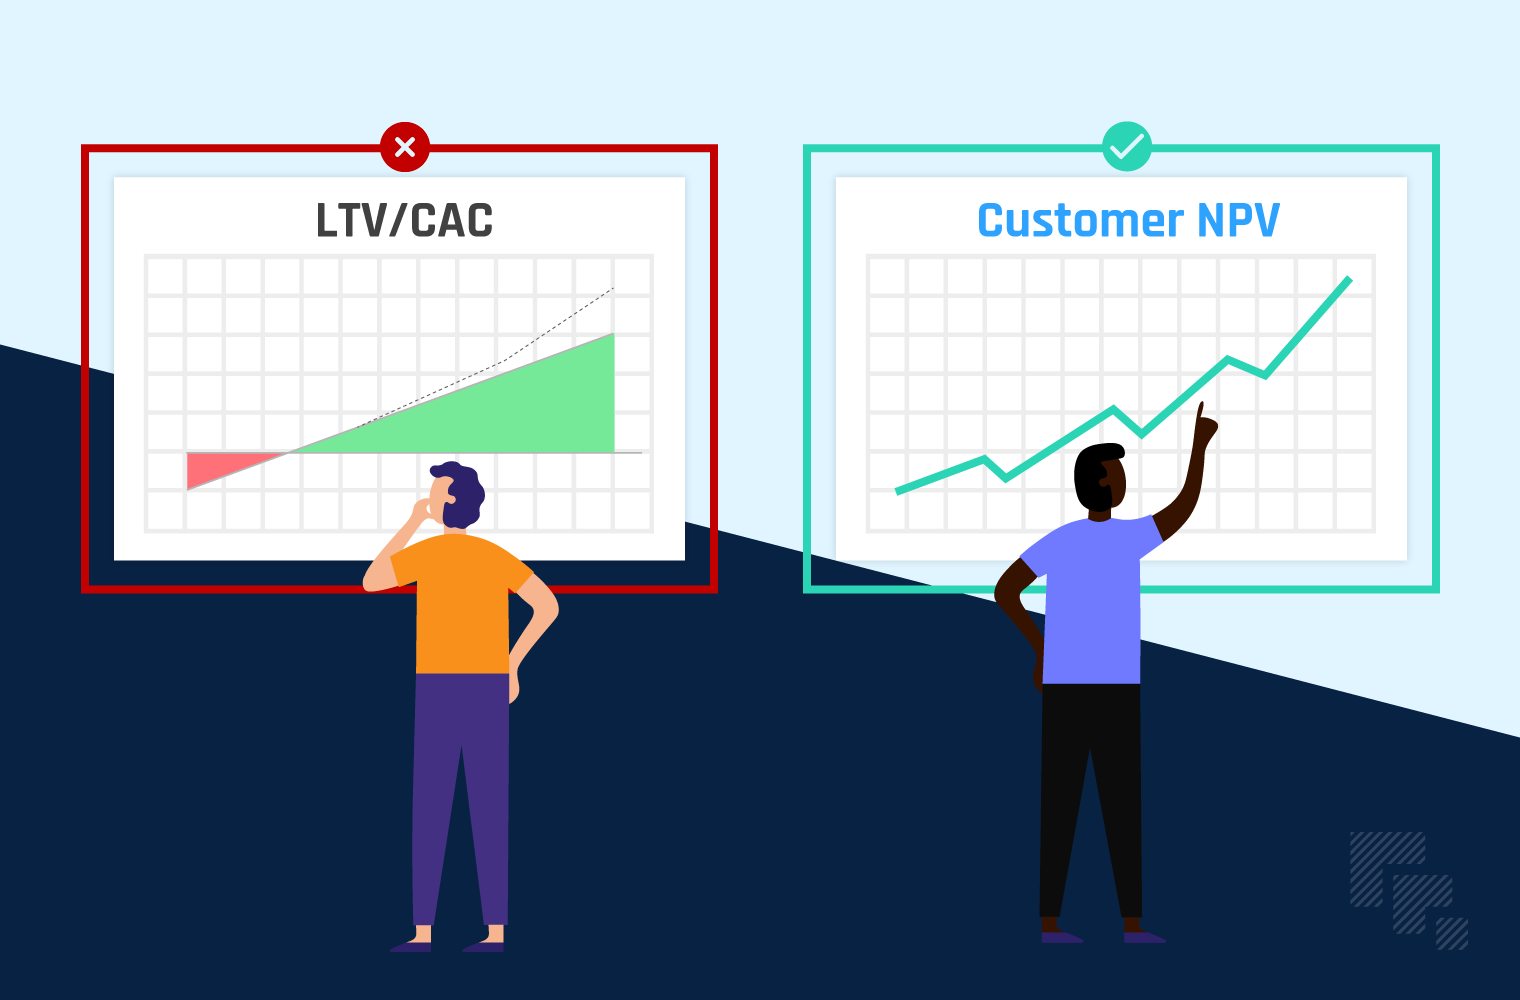 Customer Net Present Value (not LTV/CAC) is the best metric for determining unit economics of a customer.